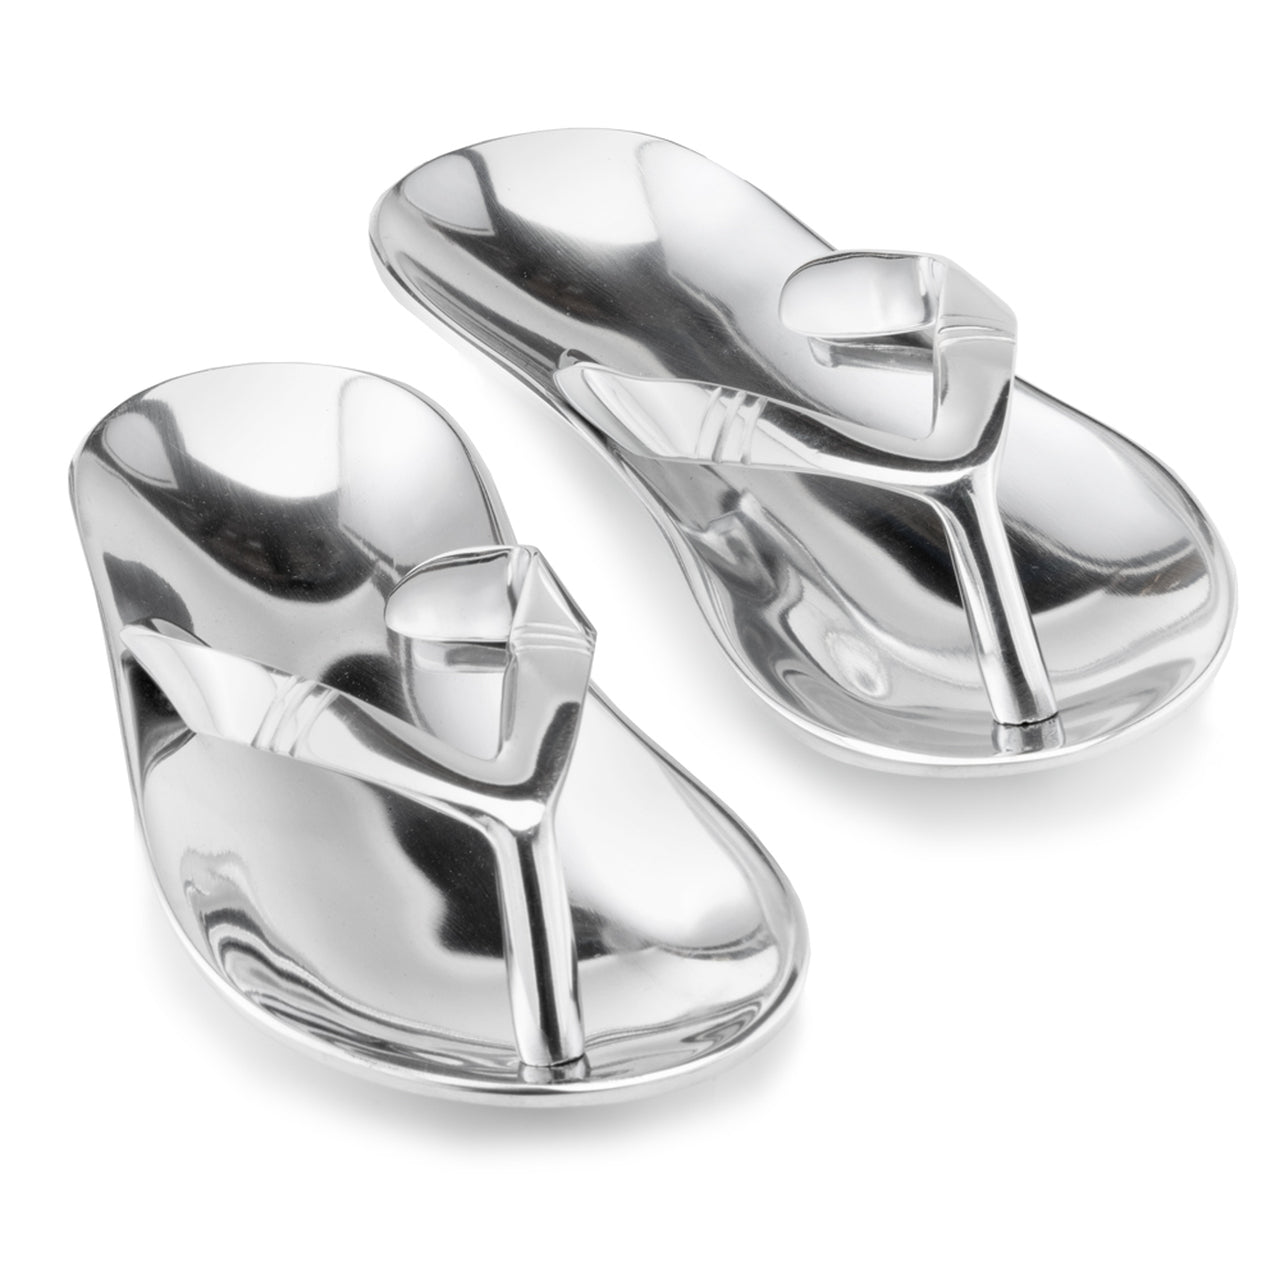 Chancla Polished Sandals - Pair MD-3550